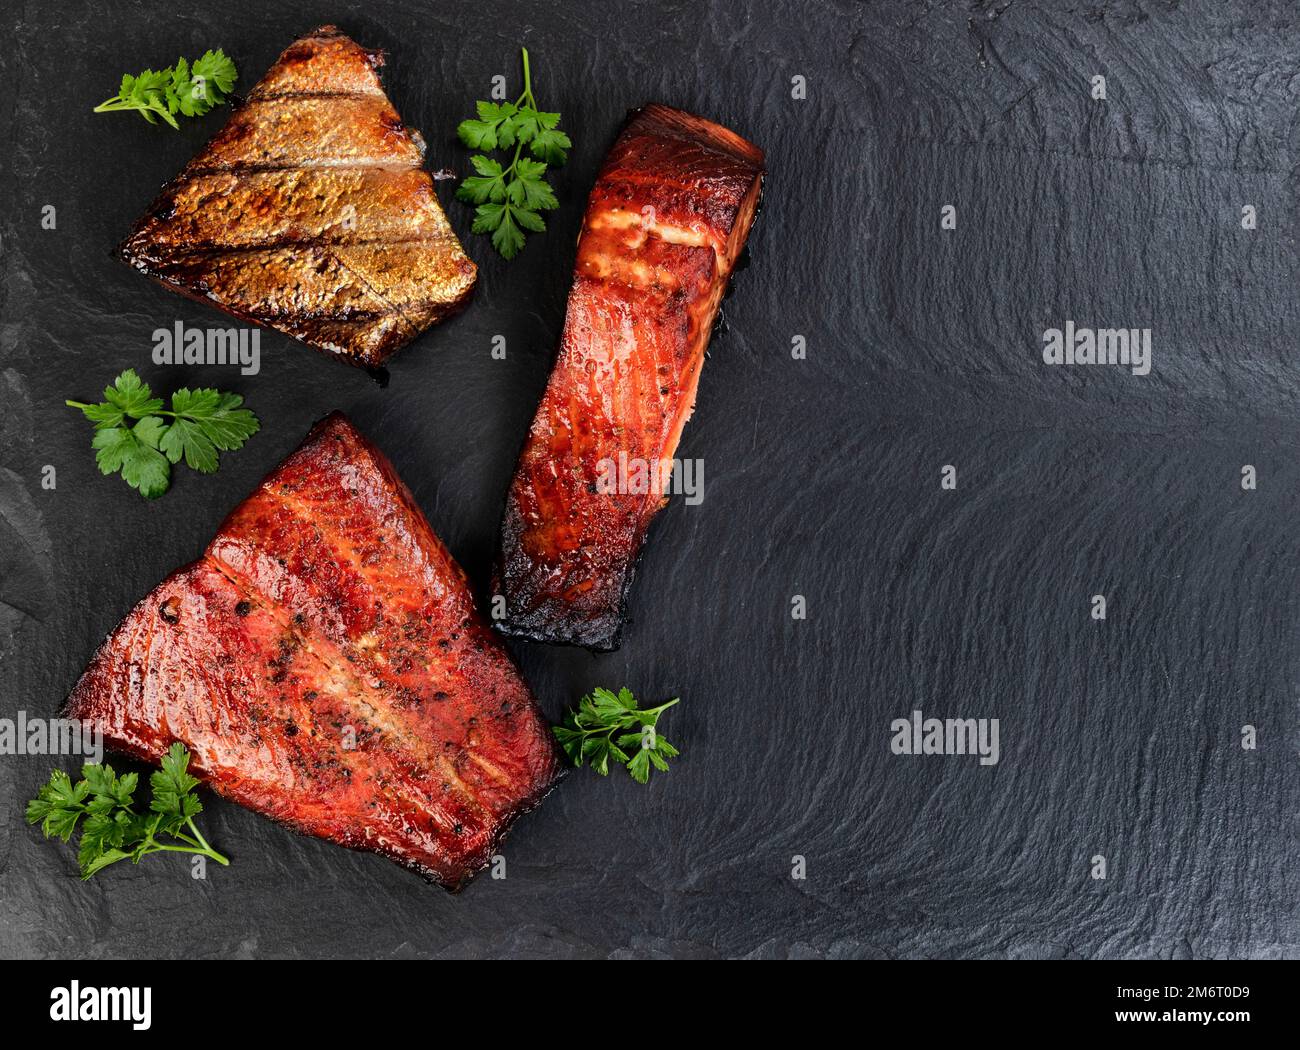 Freshly smoked fish, salmon trout, on a dark stone background. Flat lay view with copy space Stock Photo